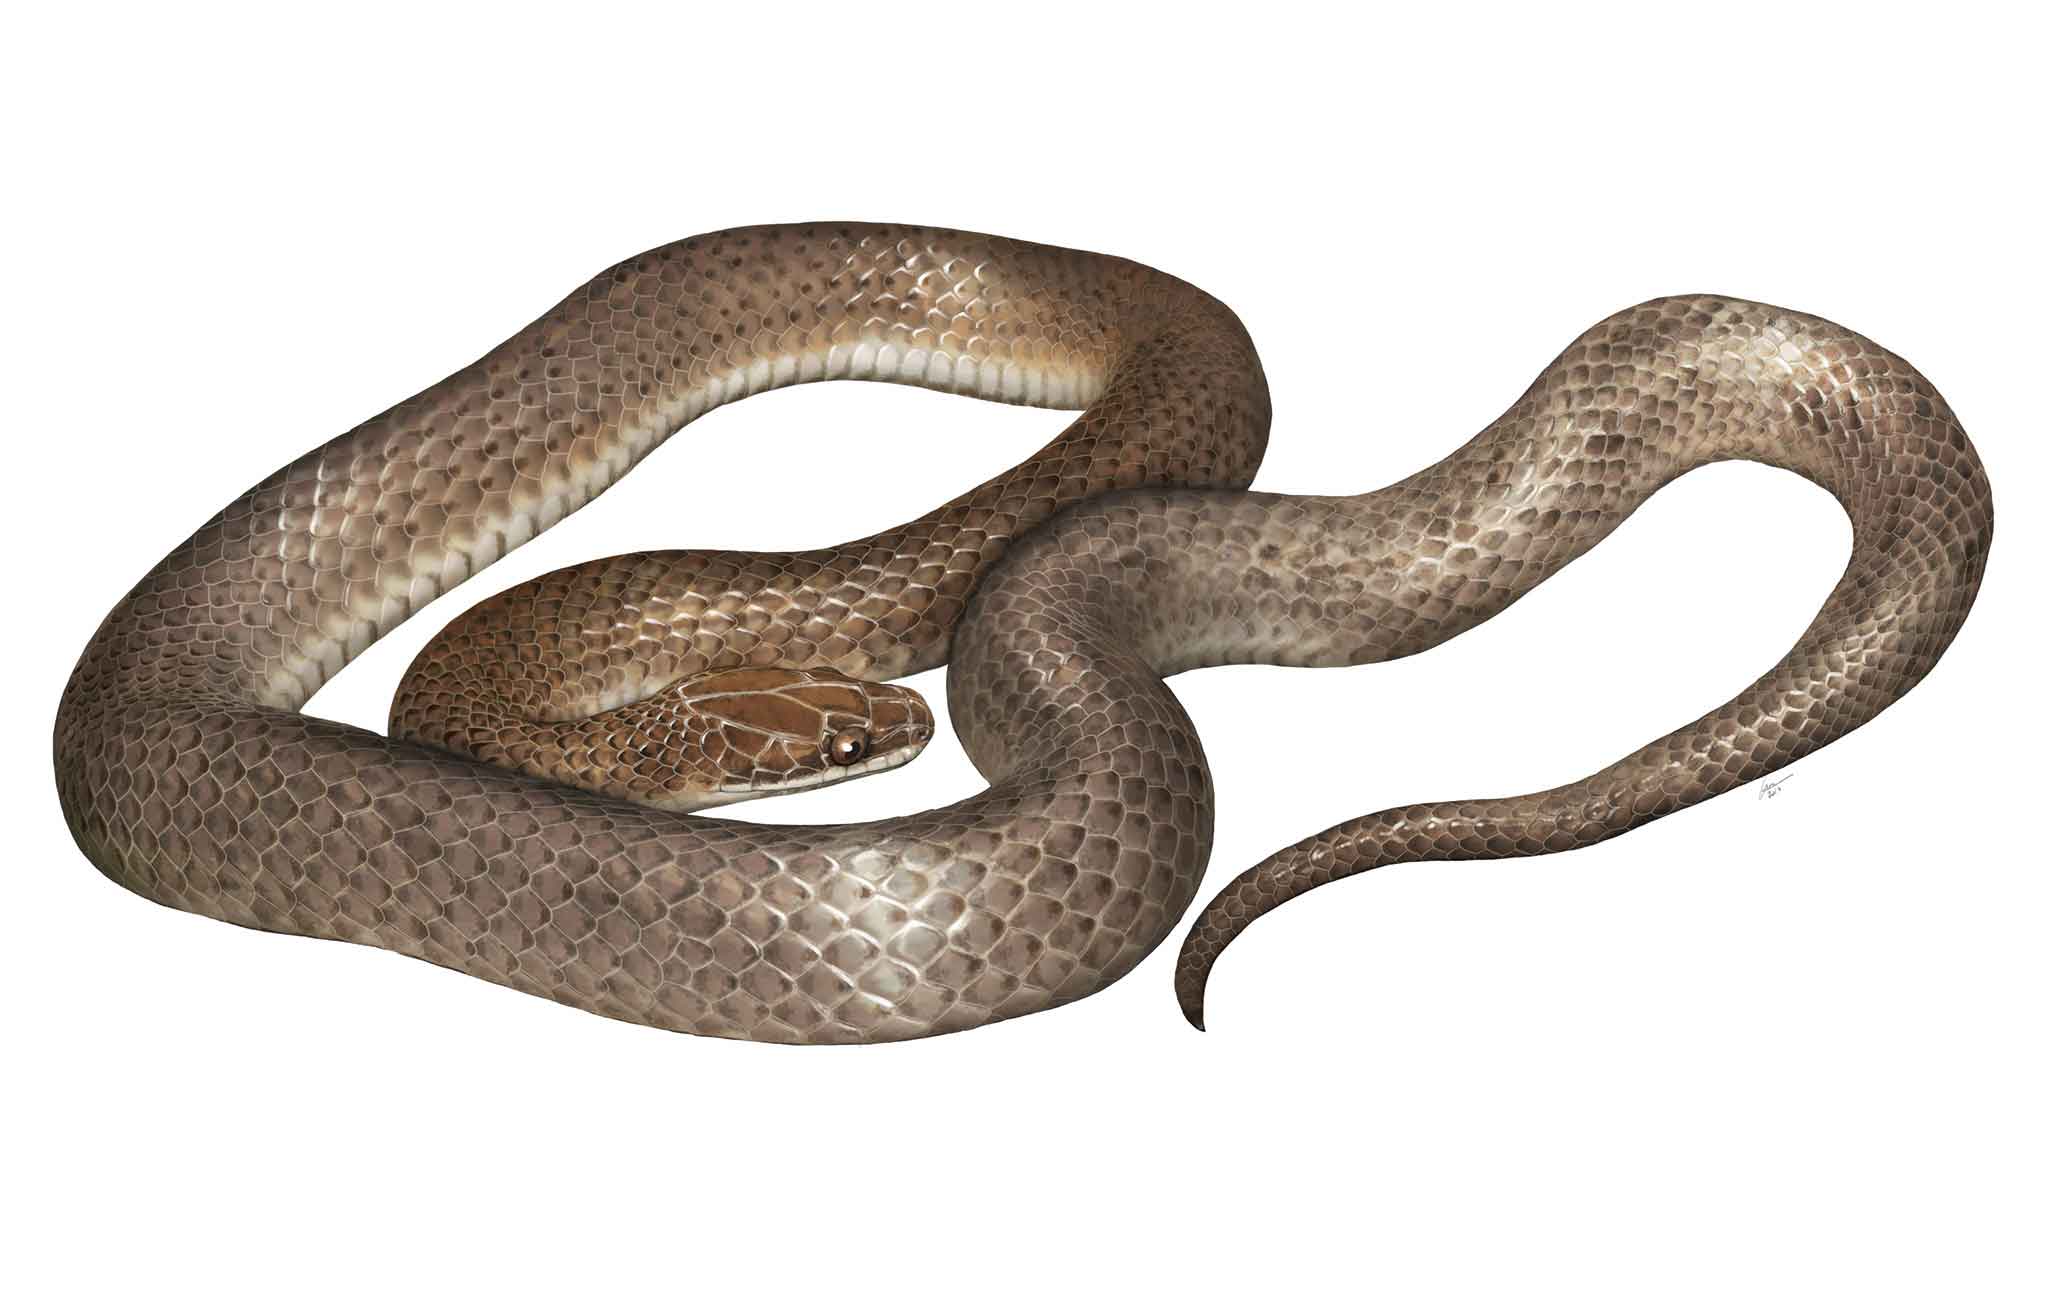 An artist’s rendering of the new species, Cenaspis aenigma, which translates to “mysterious dinner snake.” ILLUSTRATION BY GABRIEL UGUETO